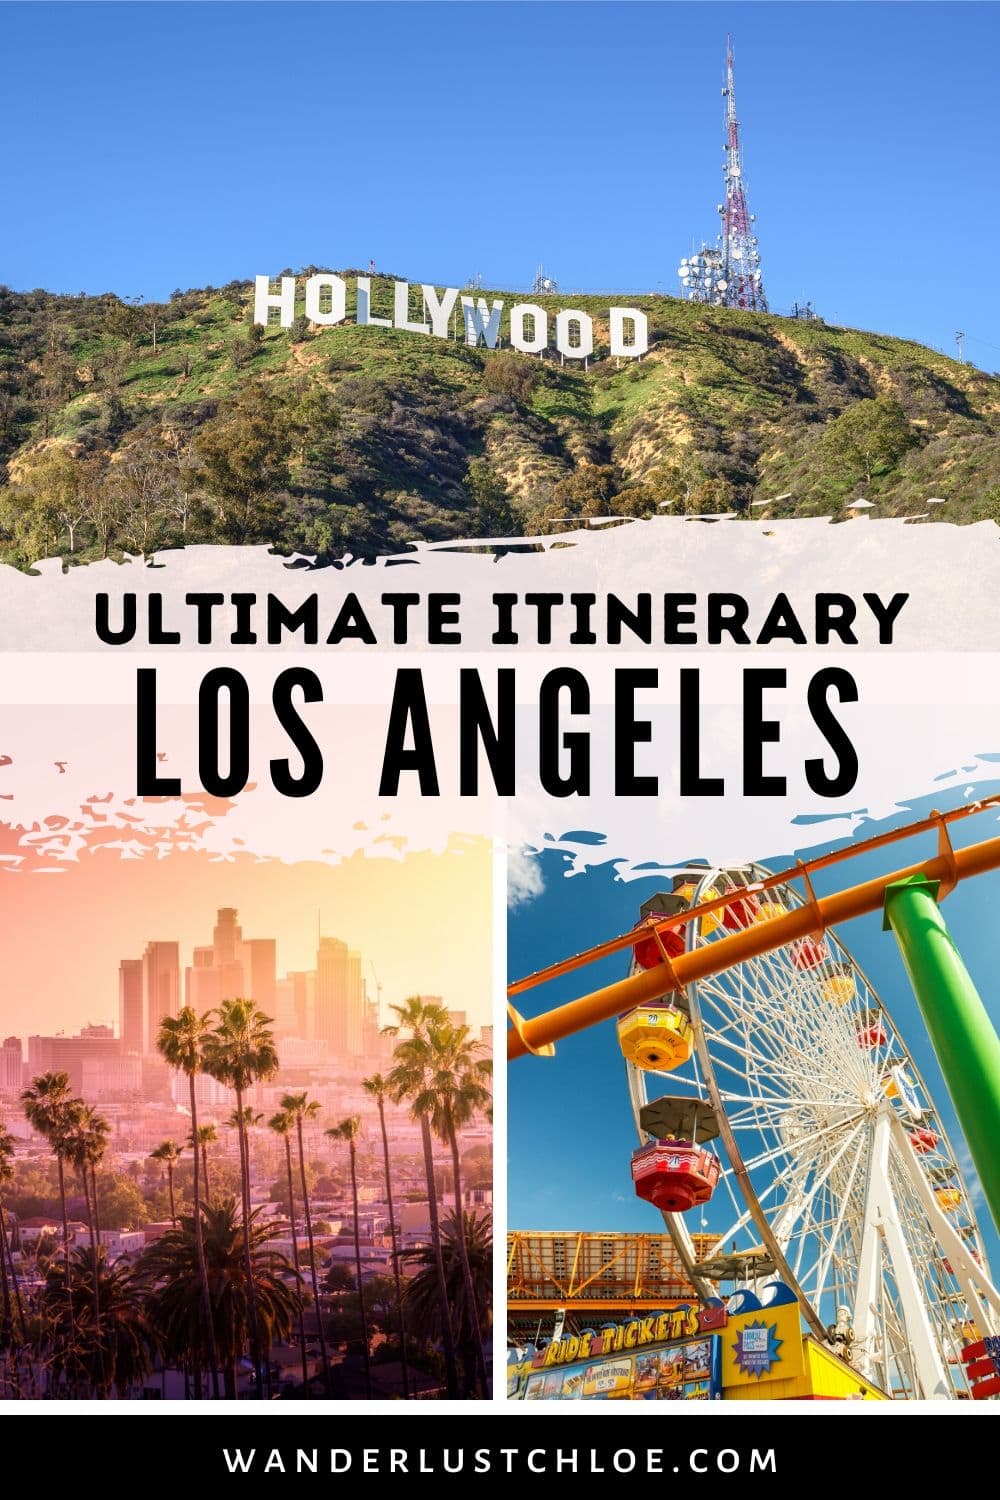 Los Angeles Travel Guide - Vacation & Tourism